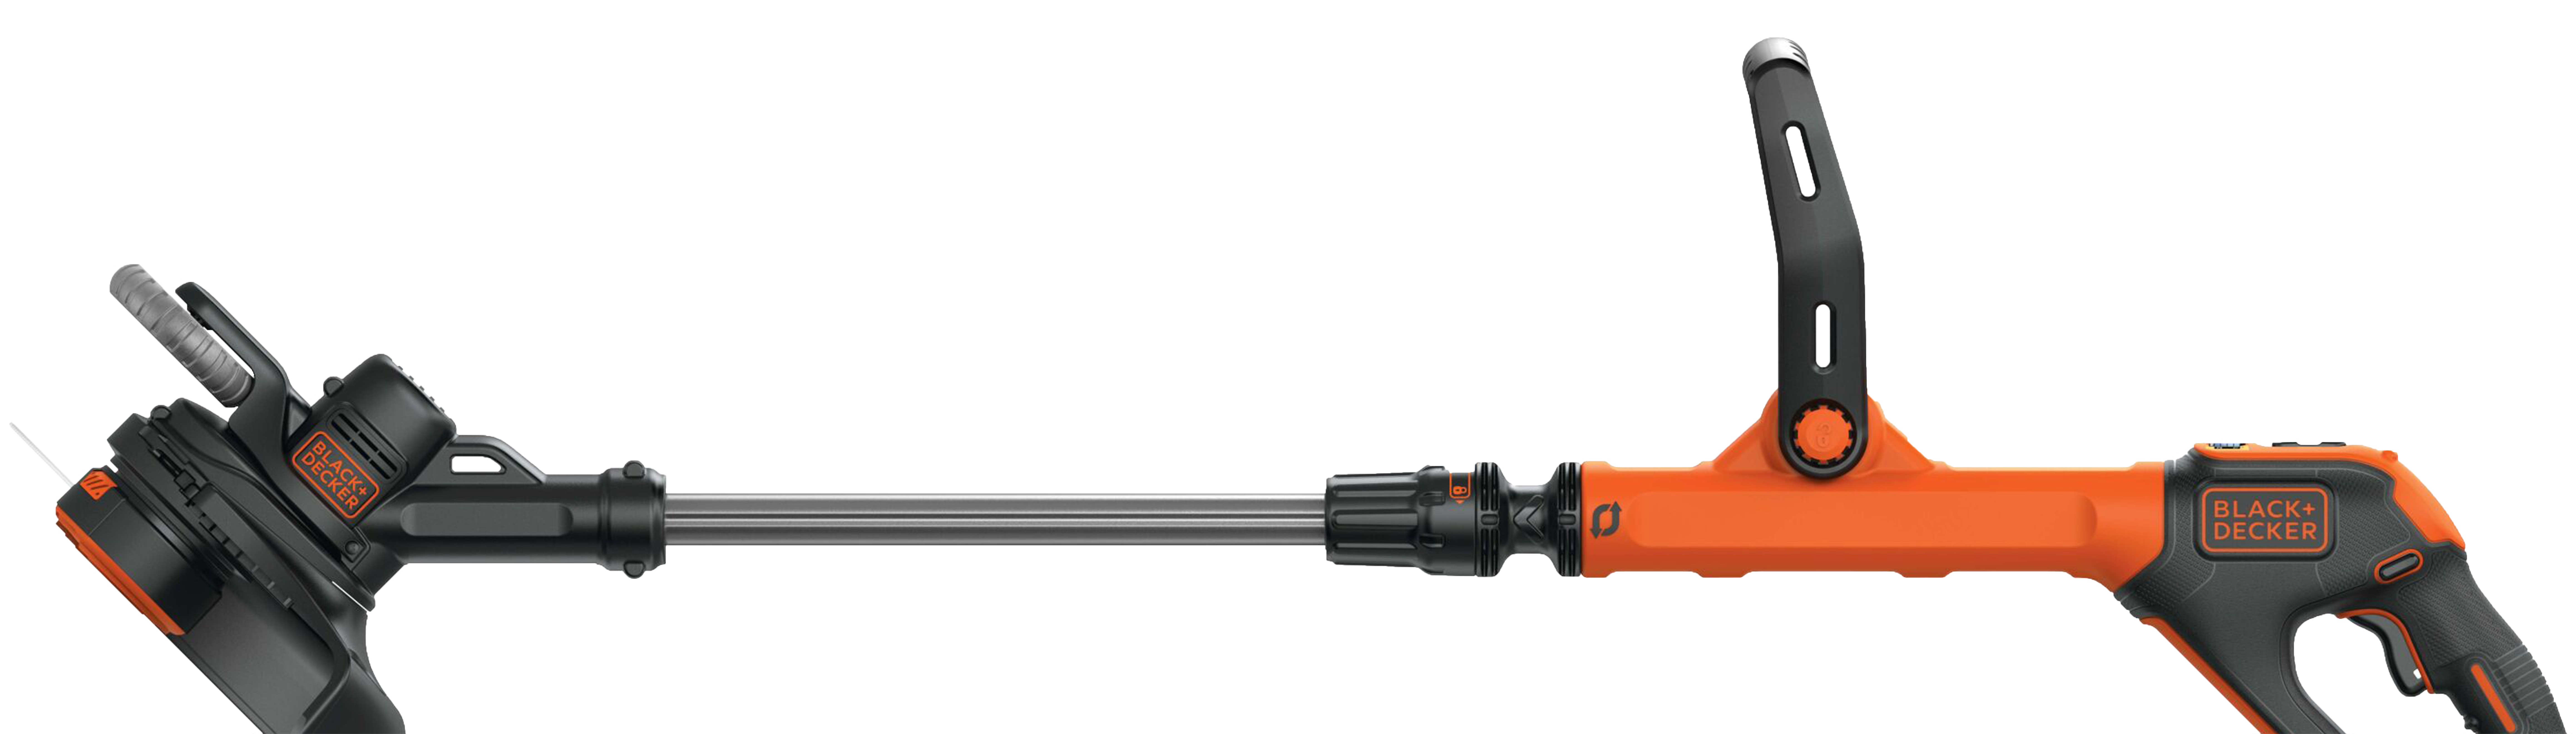  BLACK+DECKER 20V MAX String Trimmer, 2-Speed, 12-Inch with  Extra 4-Ah Lithium Ion Battery Pack (LST522 & LB2X4020) : Patio, Lawn &  Garden